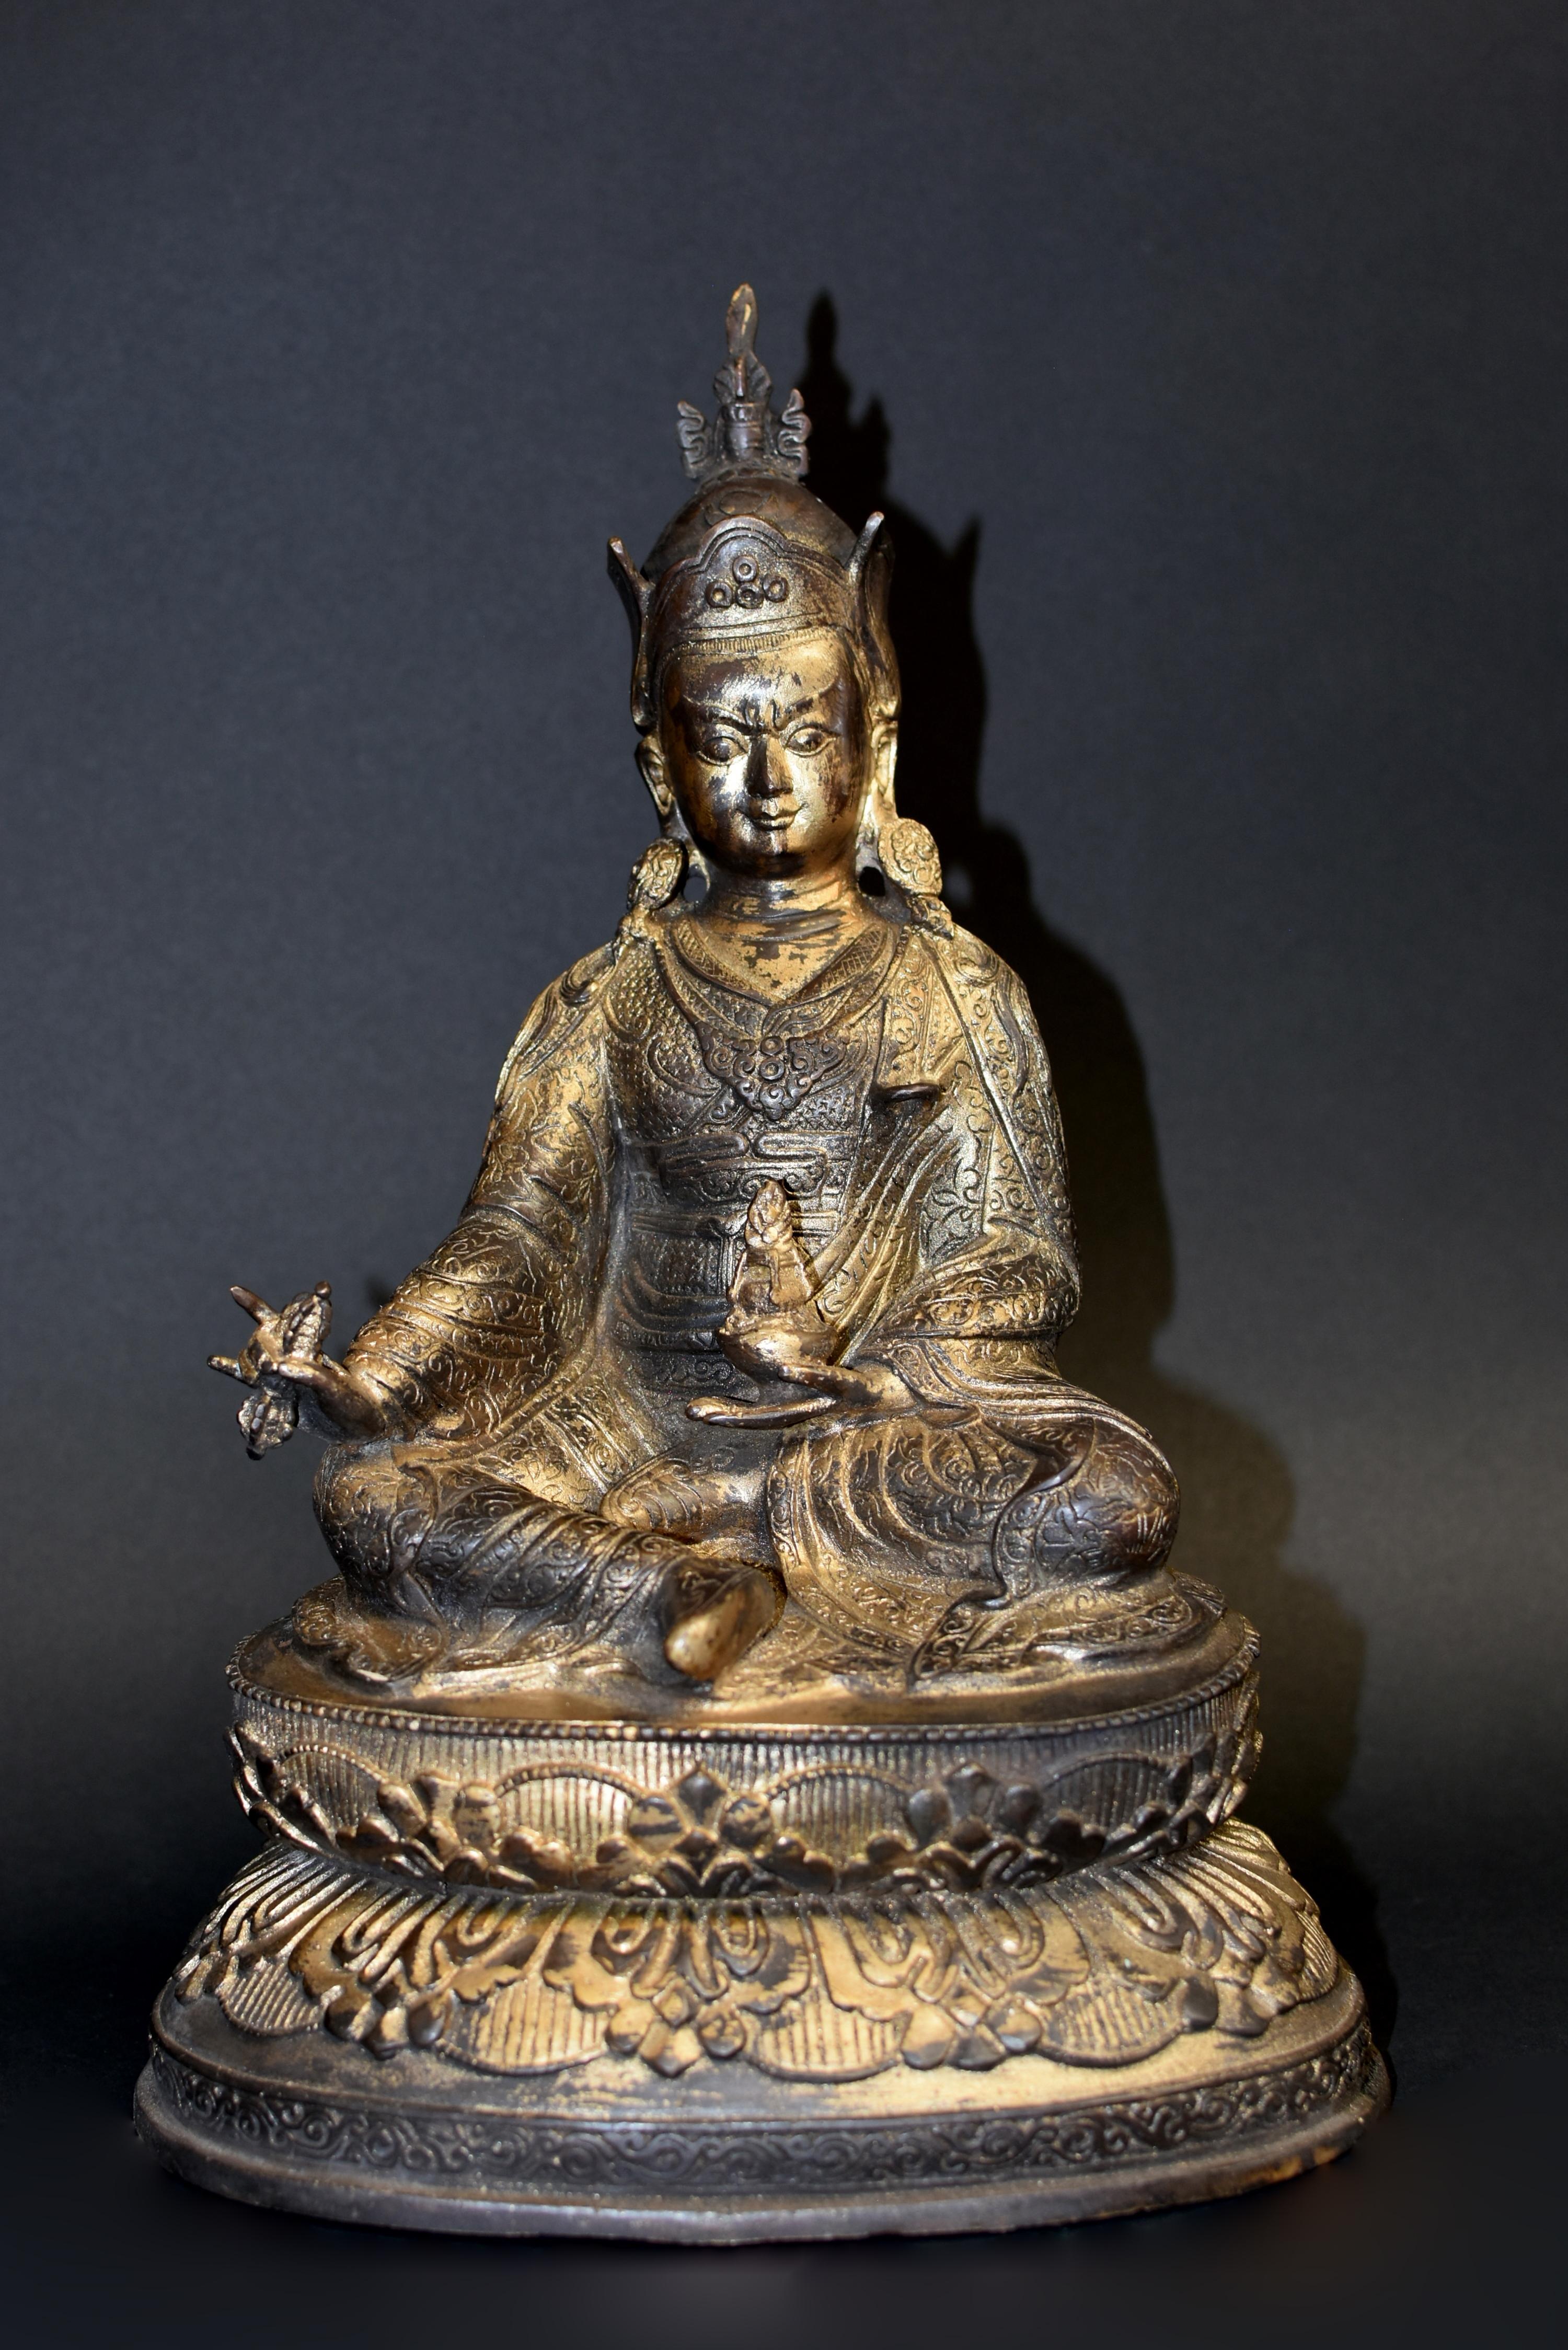 A wonderful 6.7 lb gilt copper statue of the great teacher, Padmasambhava, also called Guru Rinpoche. He is considered the founder of Tibetan Buddhism's oldest school. Seated on double lotus throne, he is wearing a peaked crown with upturned ear